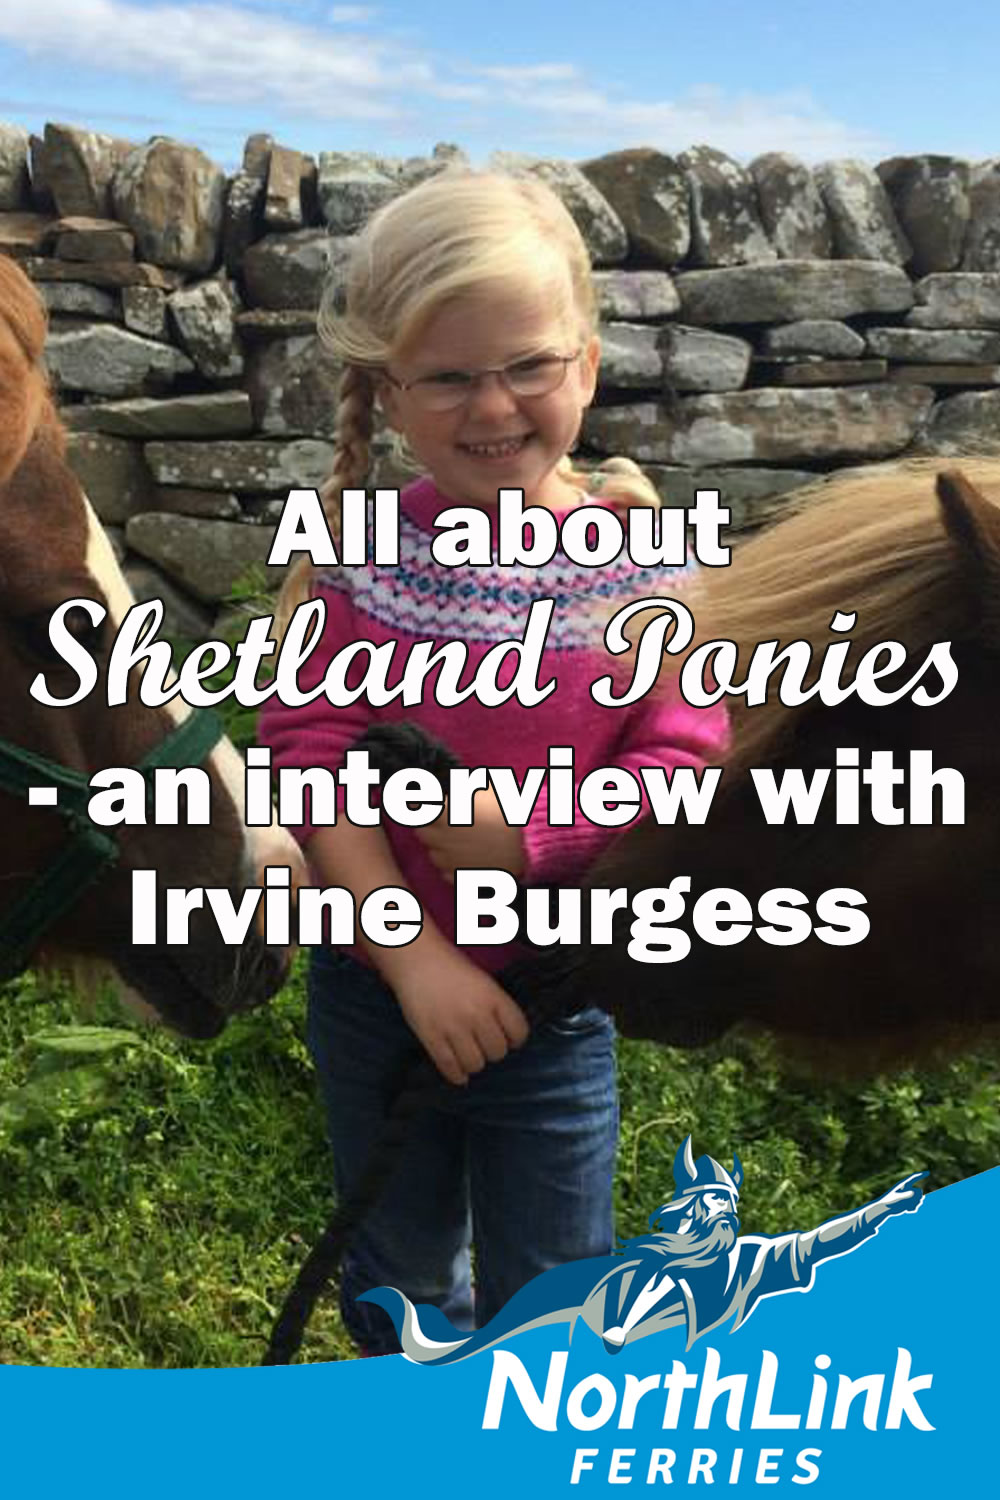 All about Shetland Ponies - an interview with Irvine Burgess